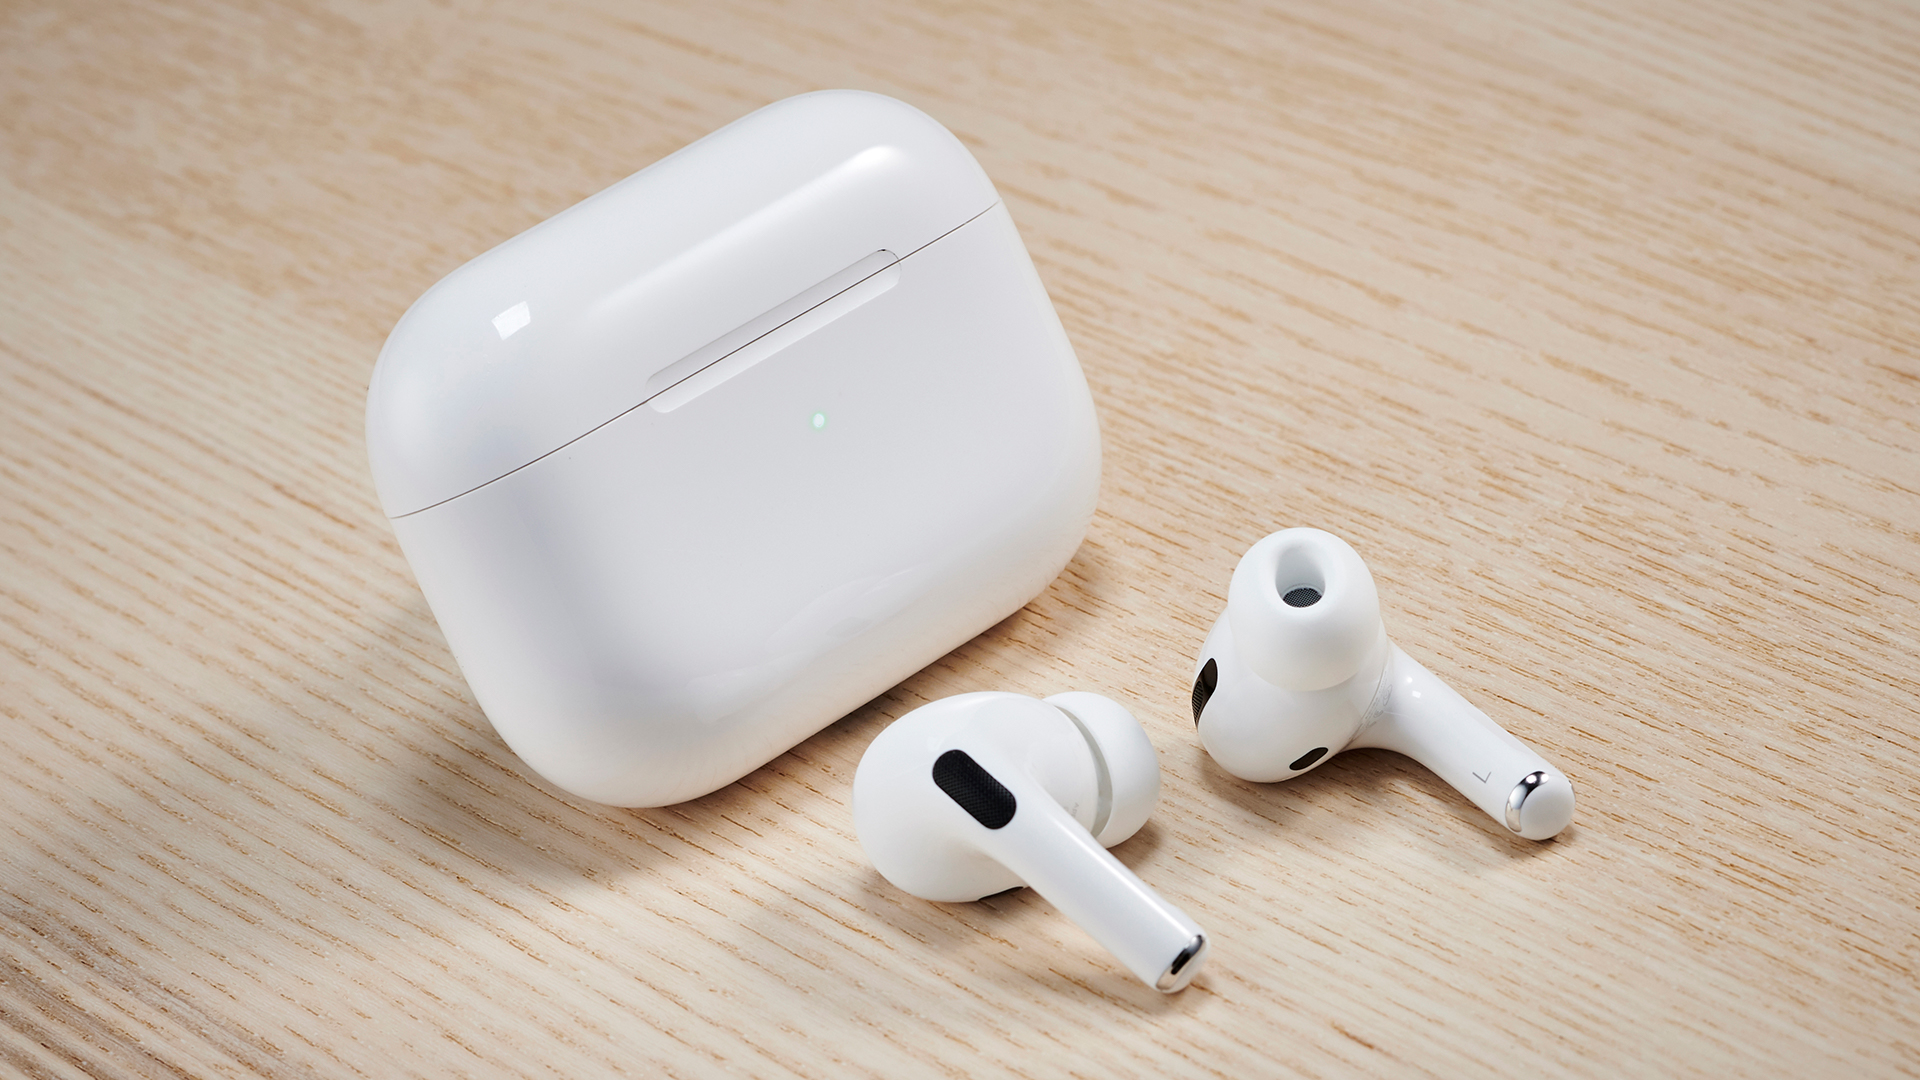 What Are Airpods And How Do They Work?